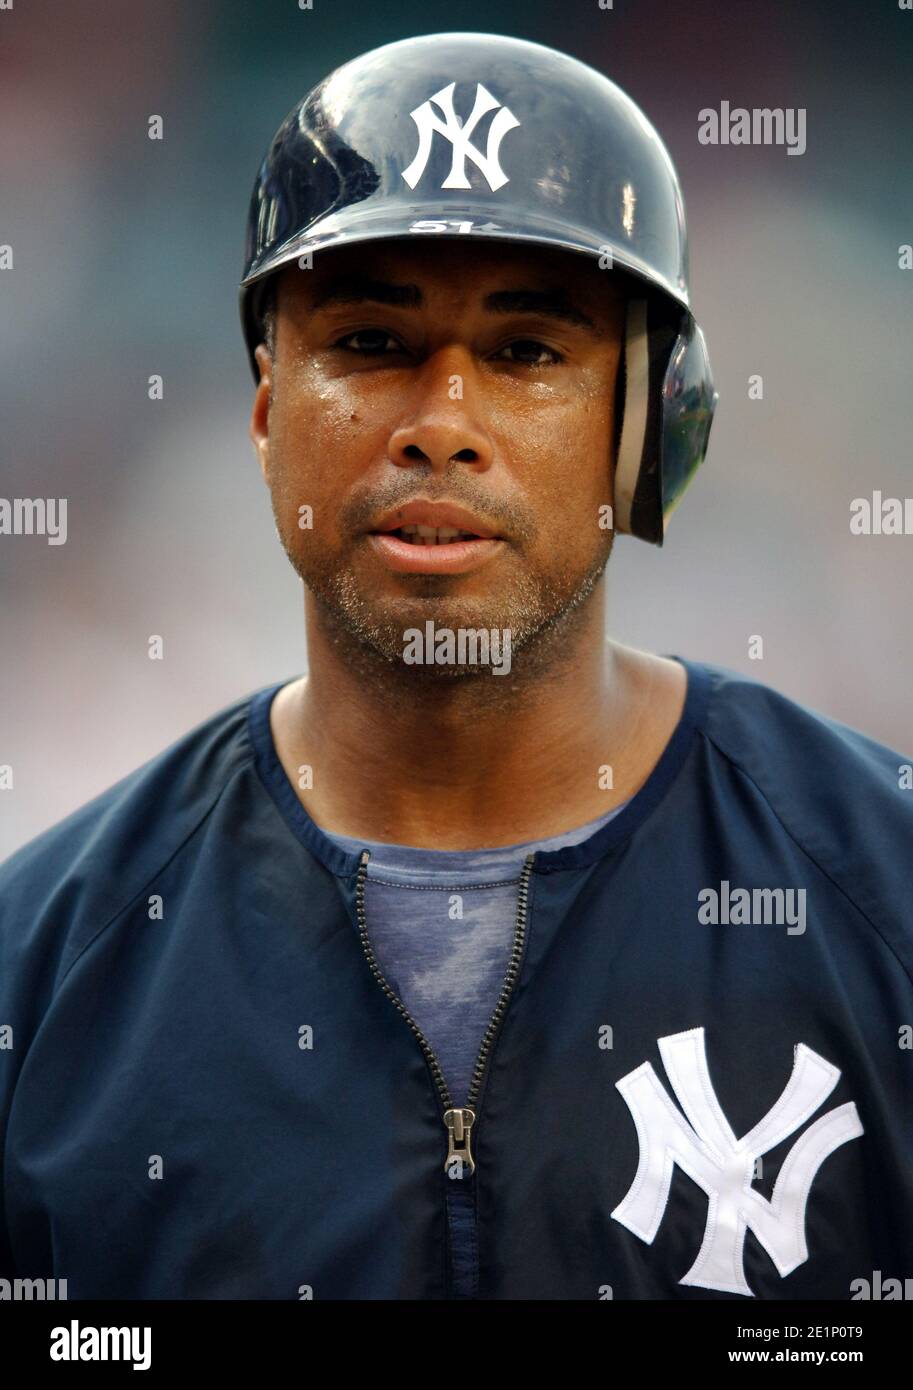 Bernie Williams of the New York Yankees during batting practice before game  against the Los Angeles Angels of Anaheim at Angel Stadium in Anaheim, Cal  Stock Photo - Alamy